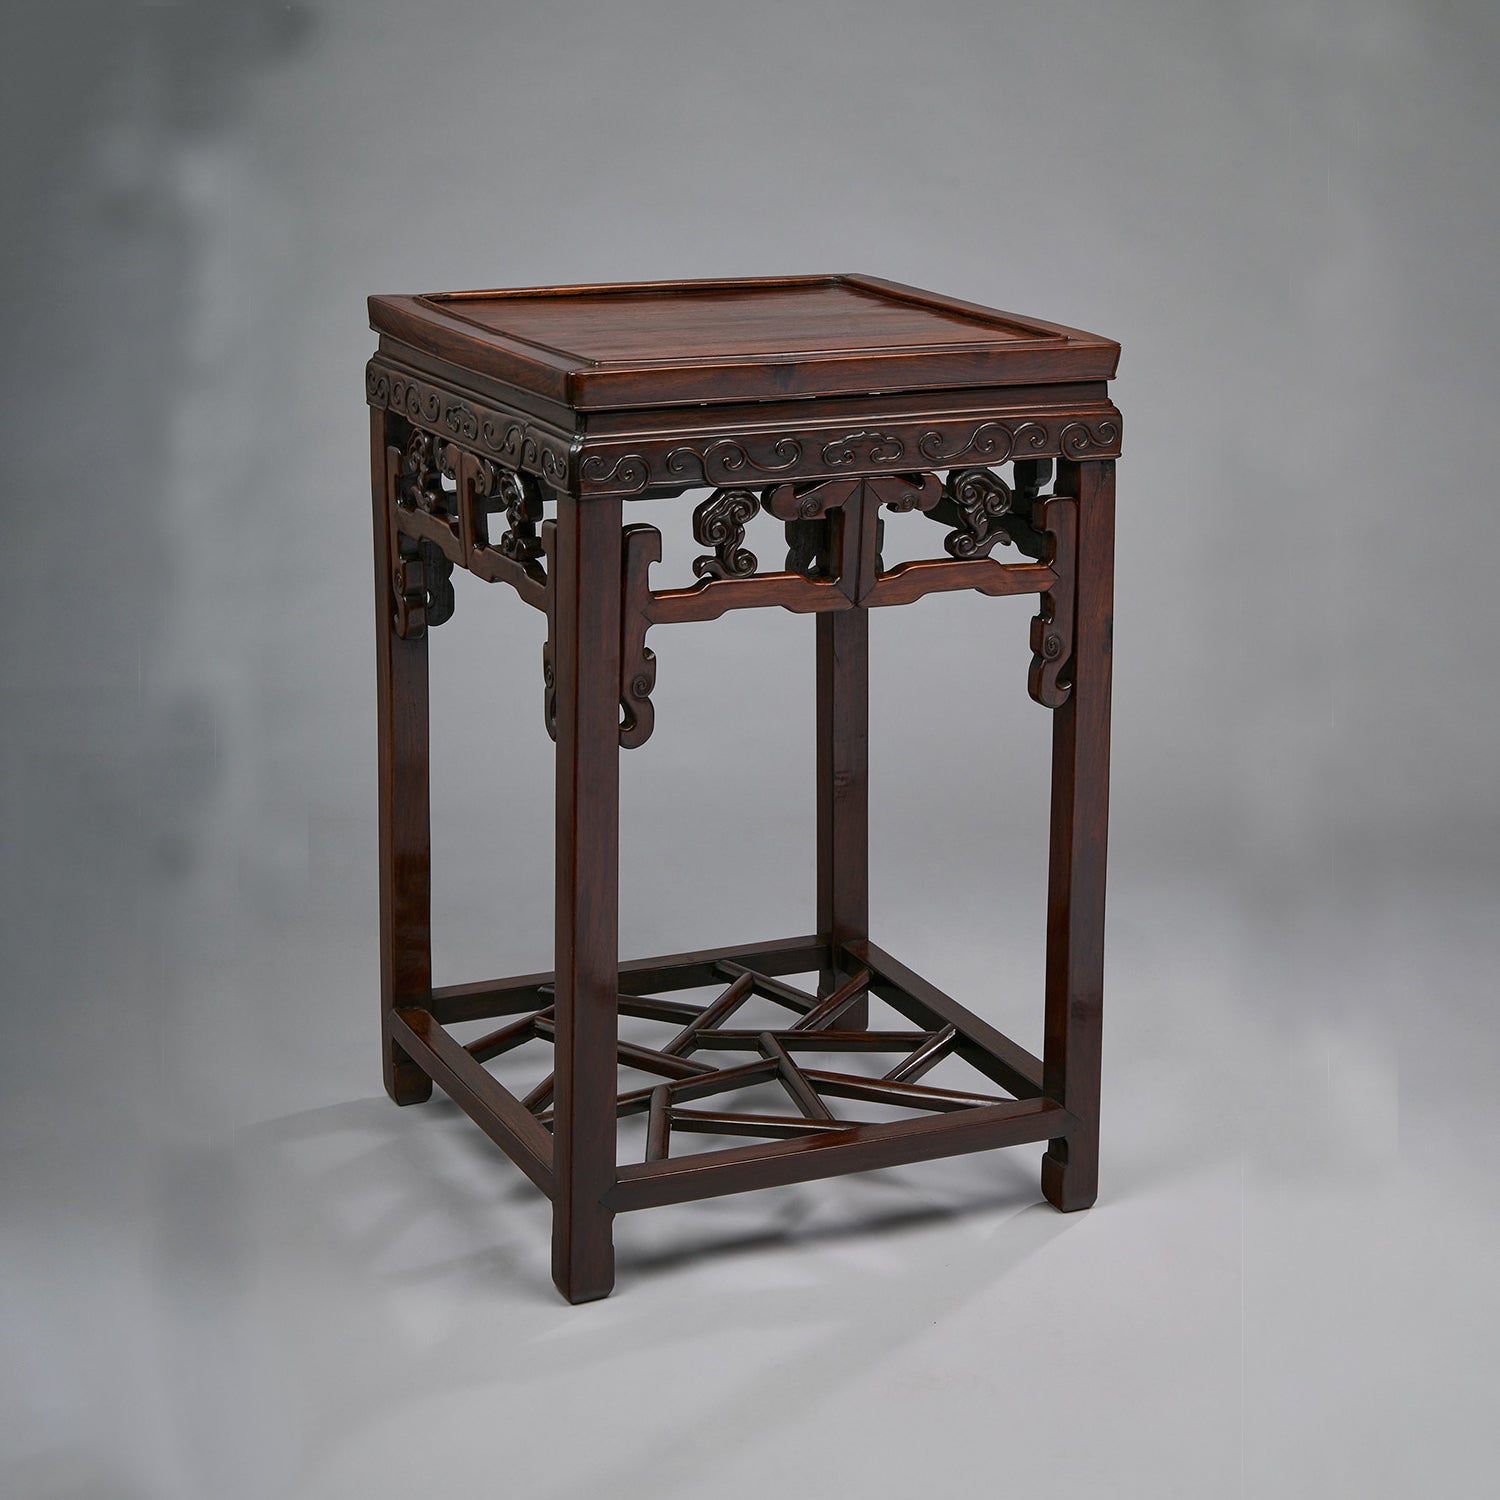 Chinese Hongmu Square Tea Table or Stand